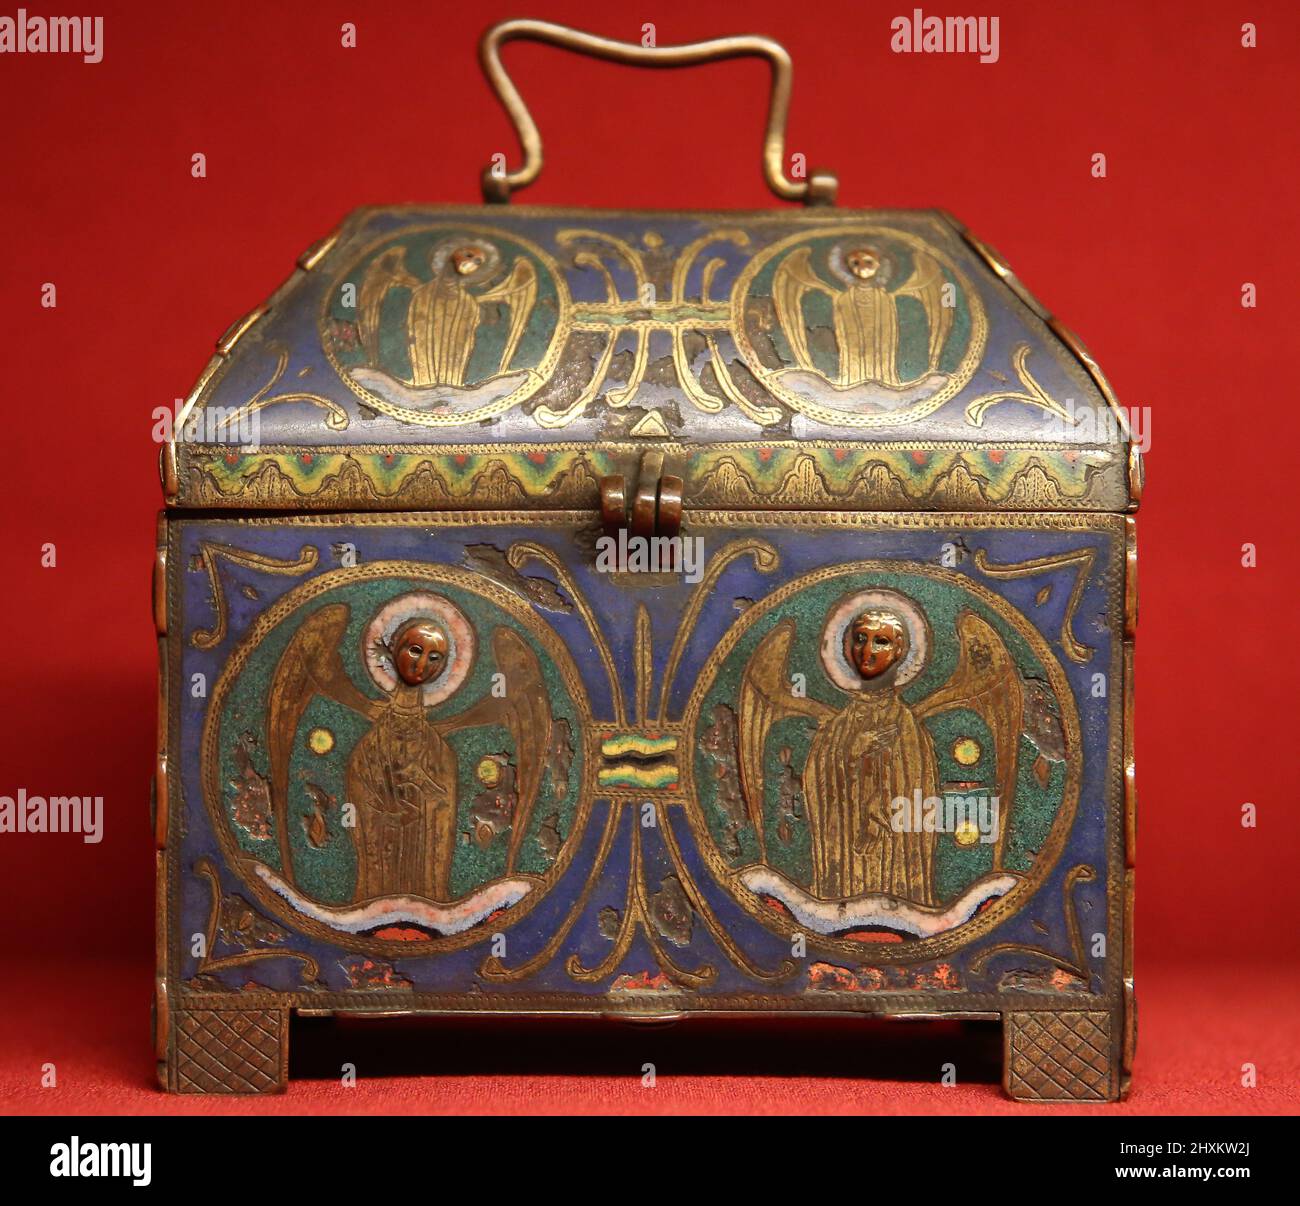 Chasse or box reliquary. Figures enamelled. Limoges. France. 13th century. Mares Museum. Barcelona. Spain Stock Photo